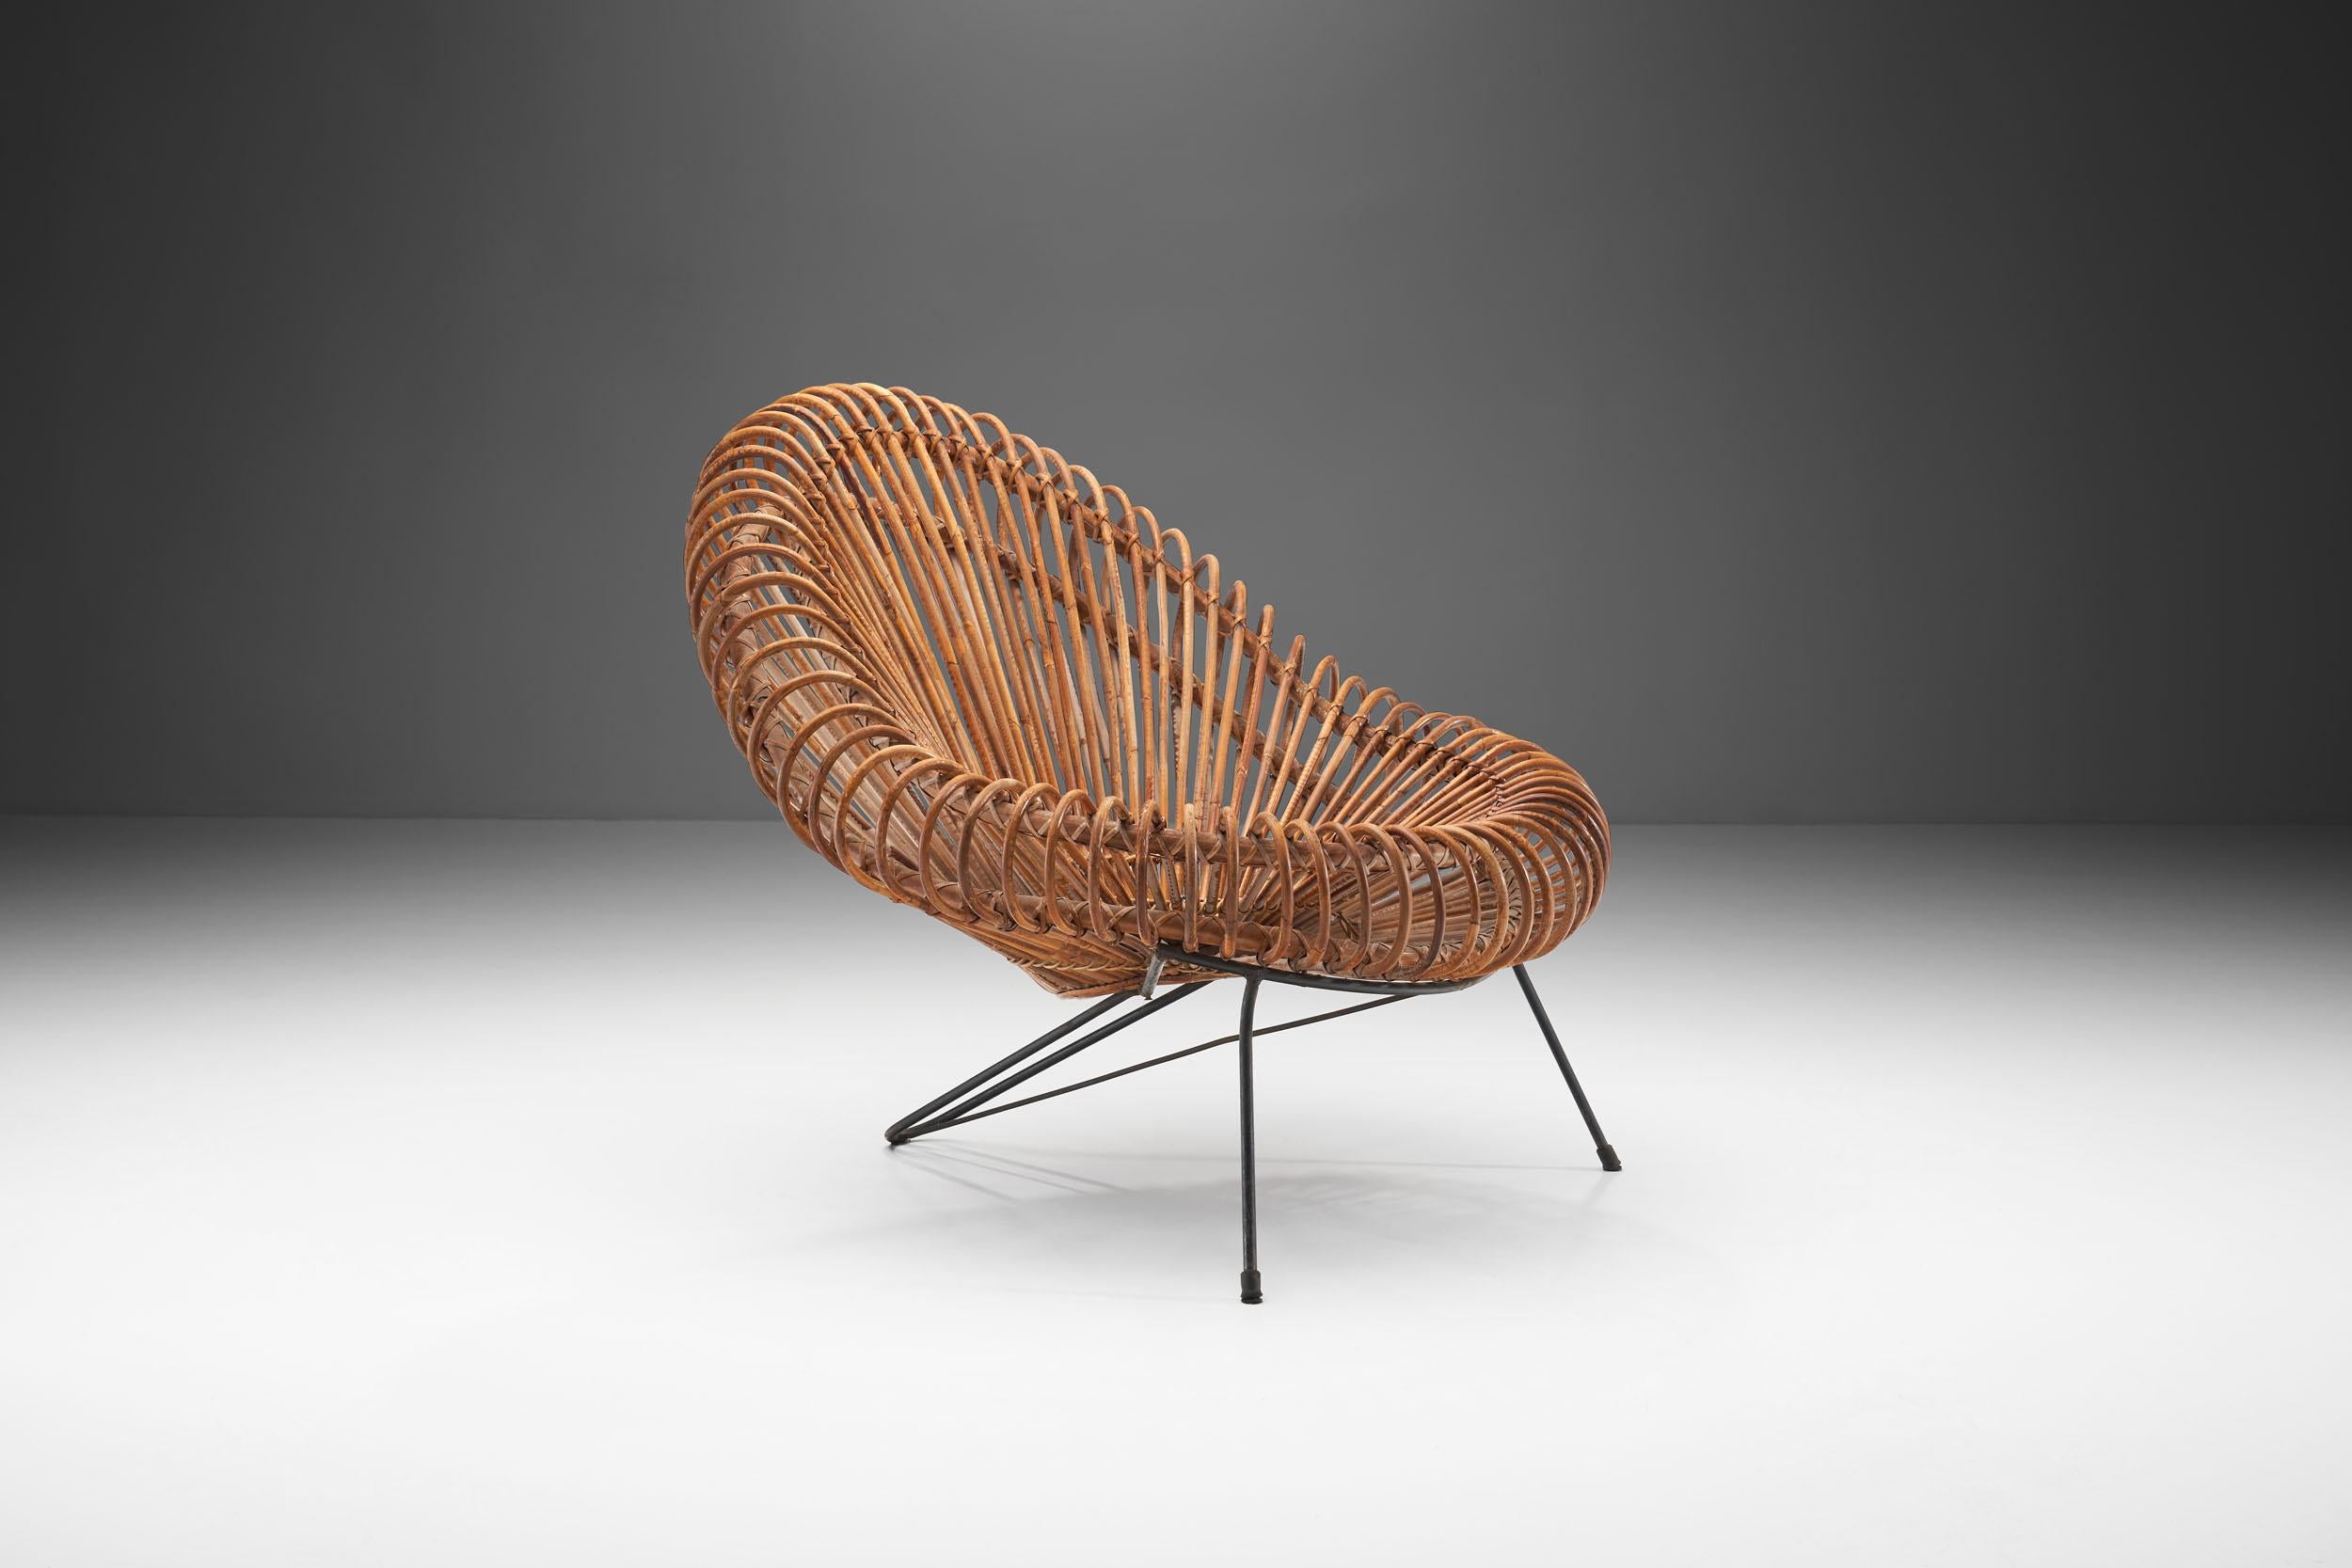 This beautiful woven rattan chair combines Janine Abraham’s imagination with Dirk Jan Rol’s architectural construction skills. 

From the circular woven center to the shell of the seat, the craft of the designer and manufacturer is outstanding.